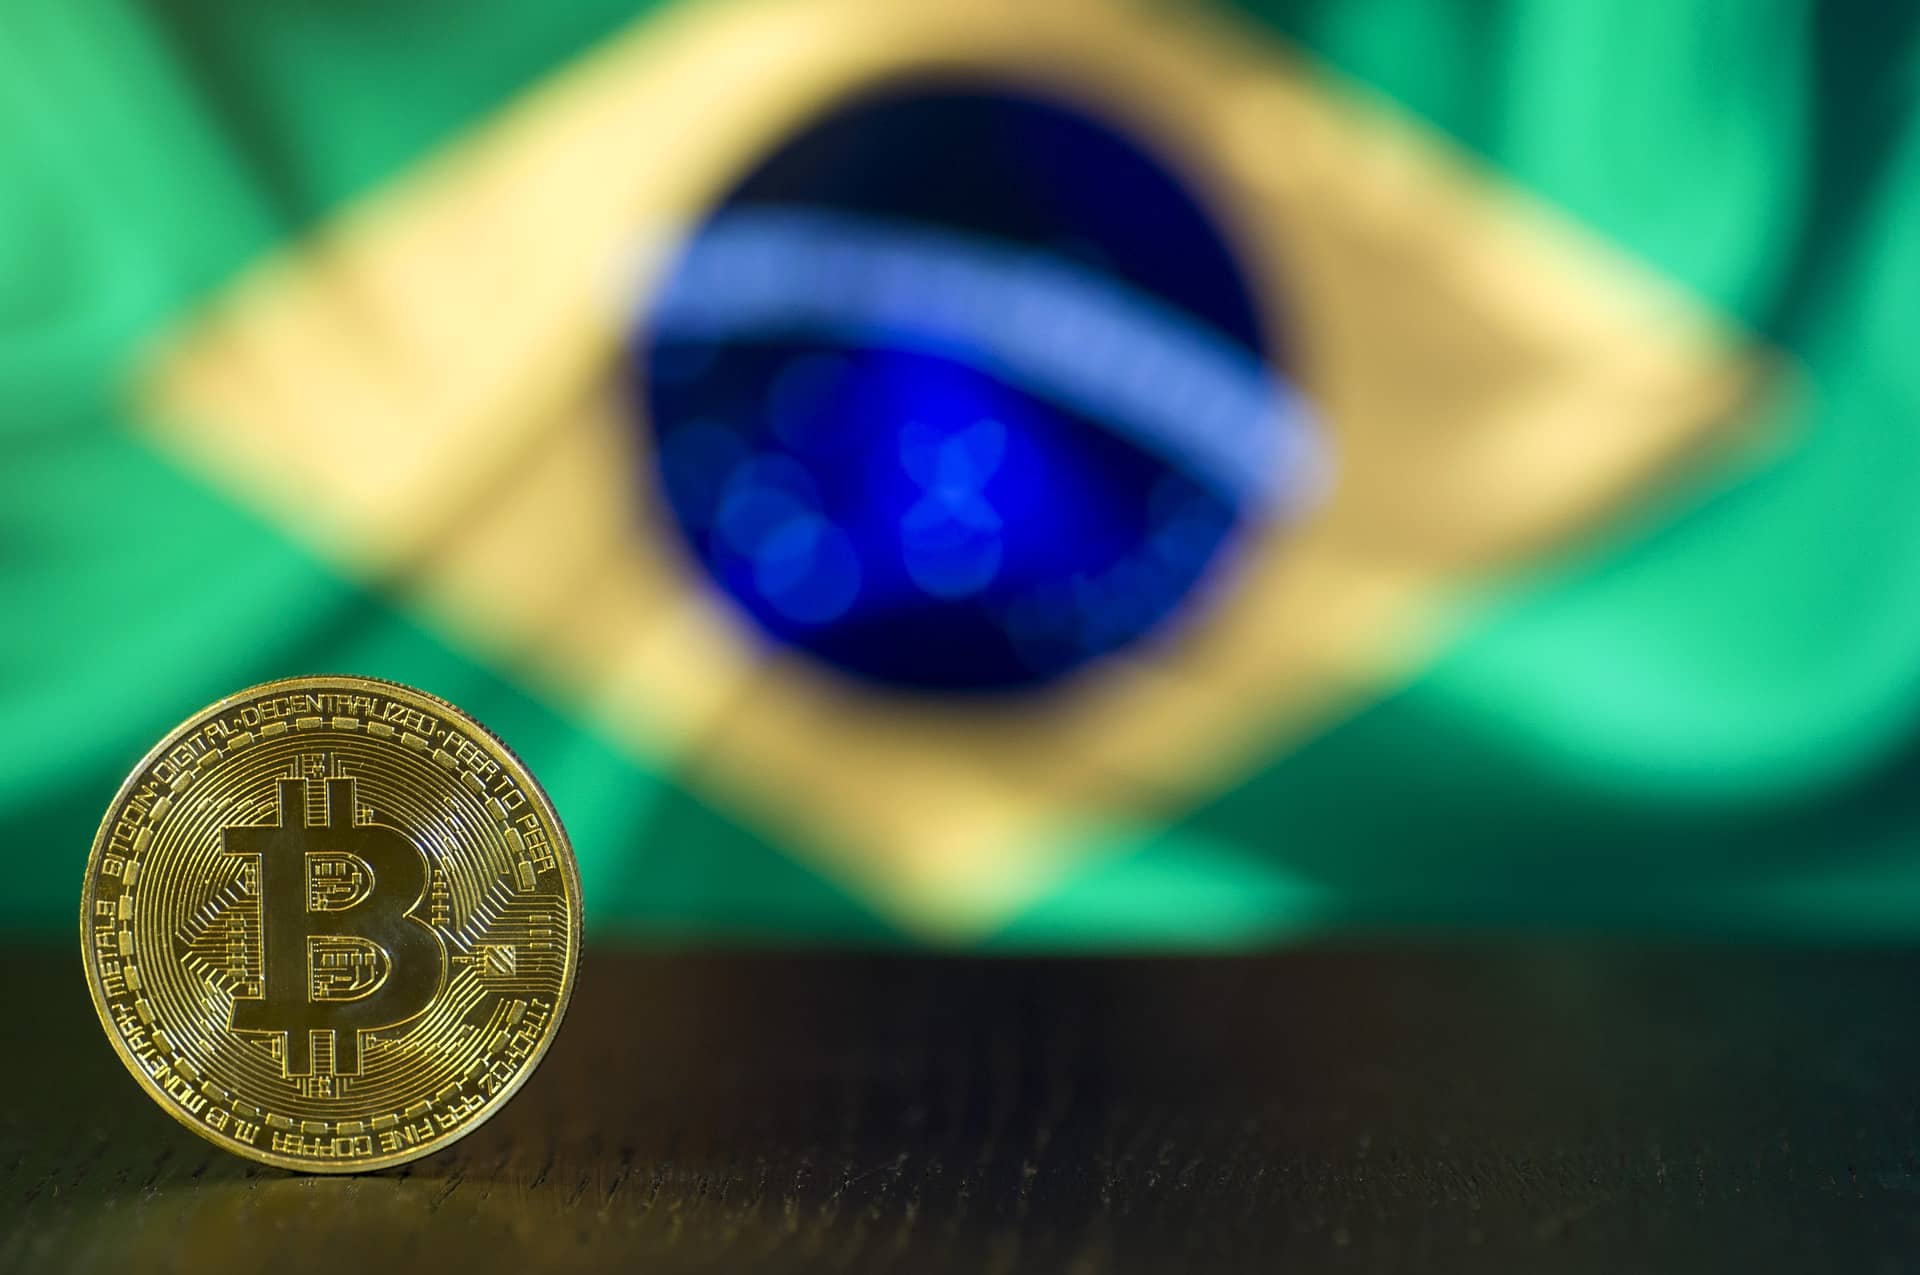 Brazil coin cryptocurrency cryptocurrency second stream of income